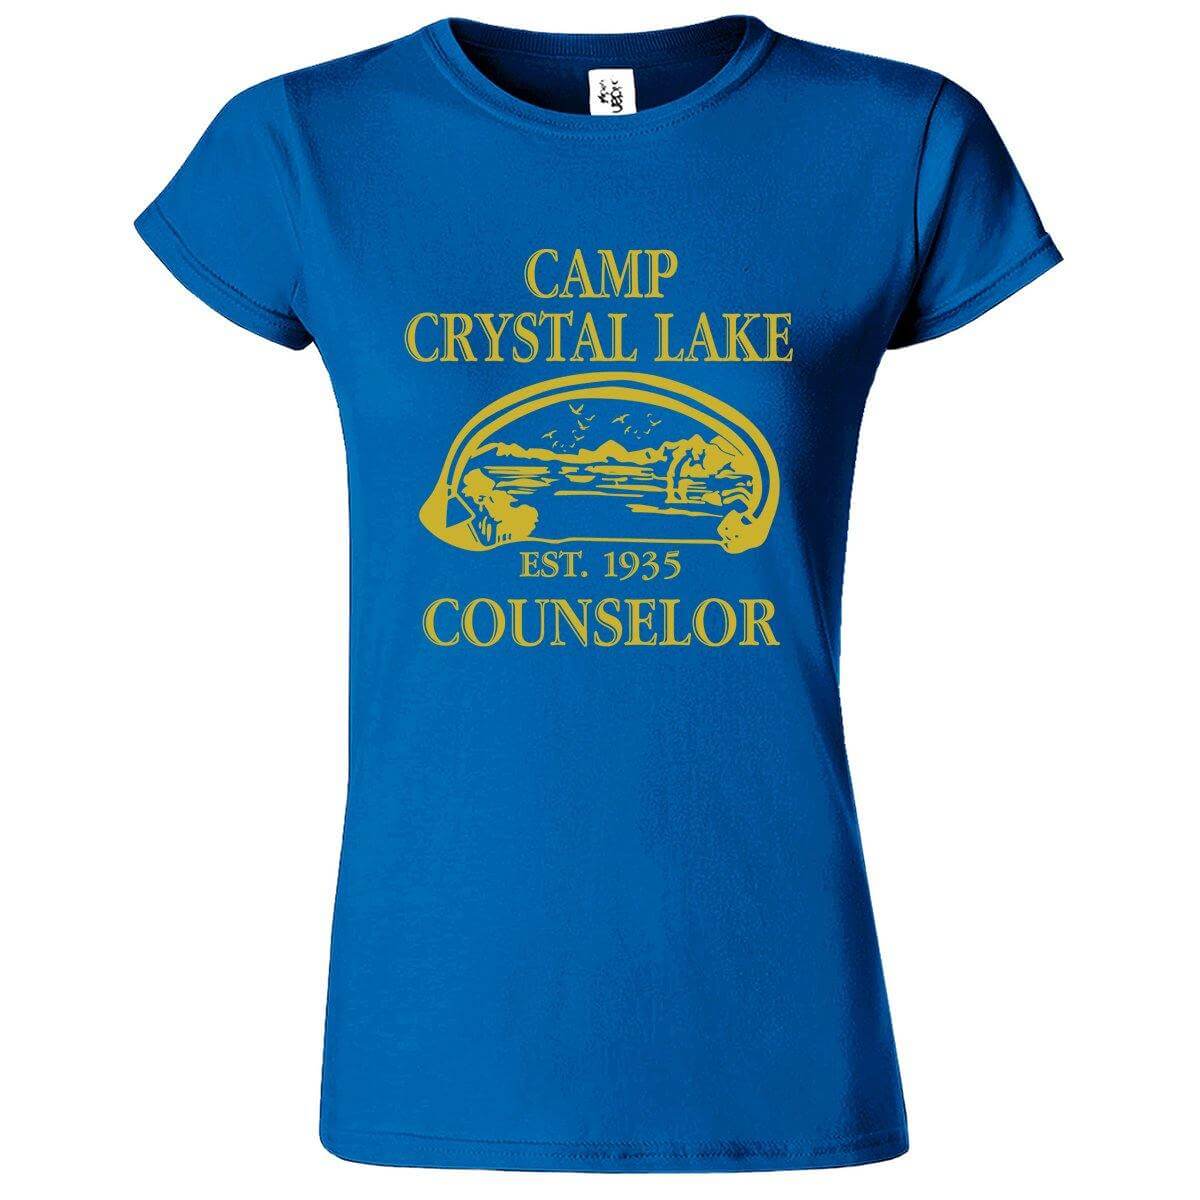 Camp Crystal Lake Printed T-Shirt for Women's - ApparelinClick